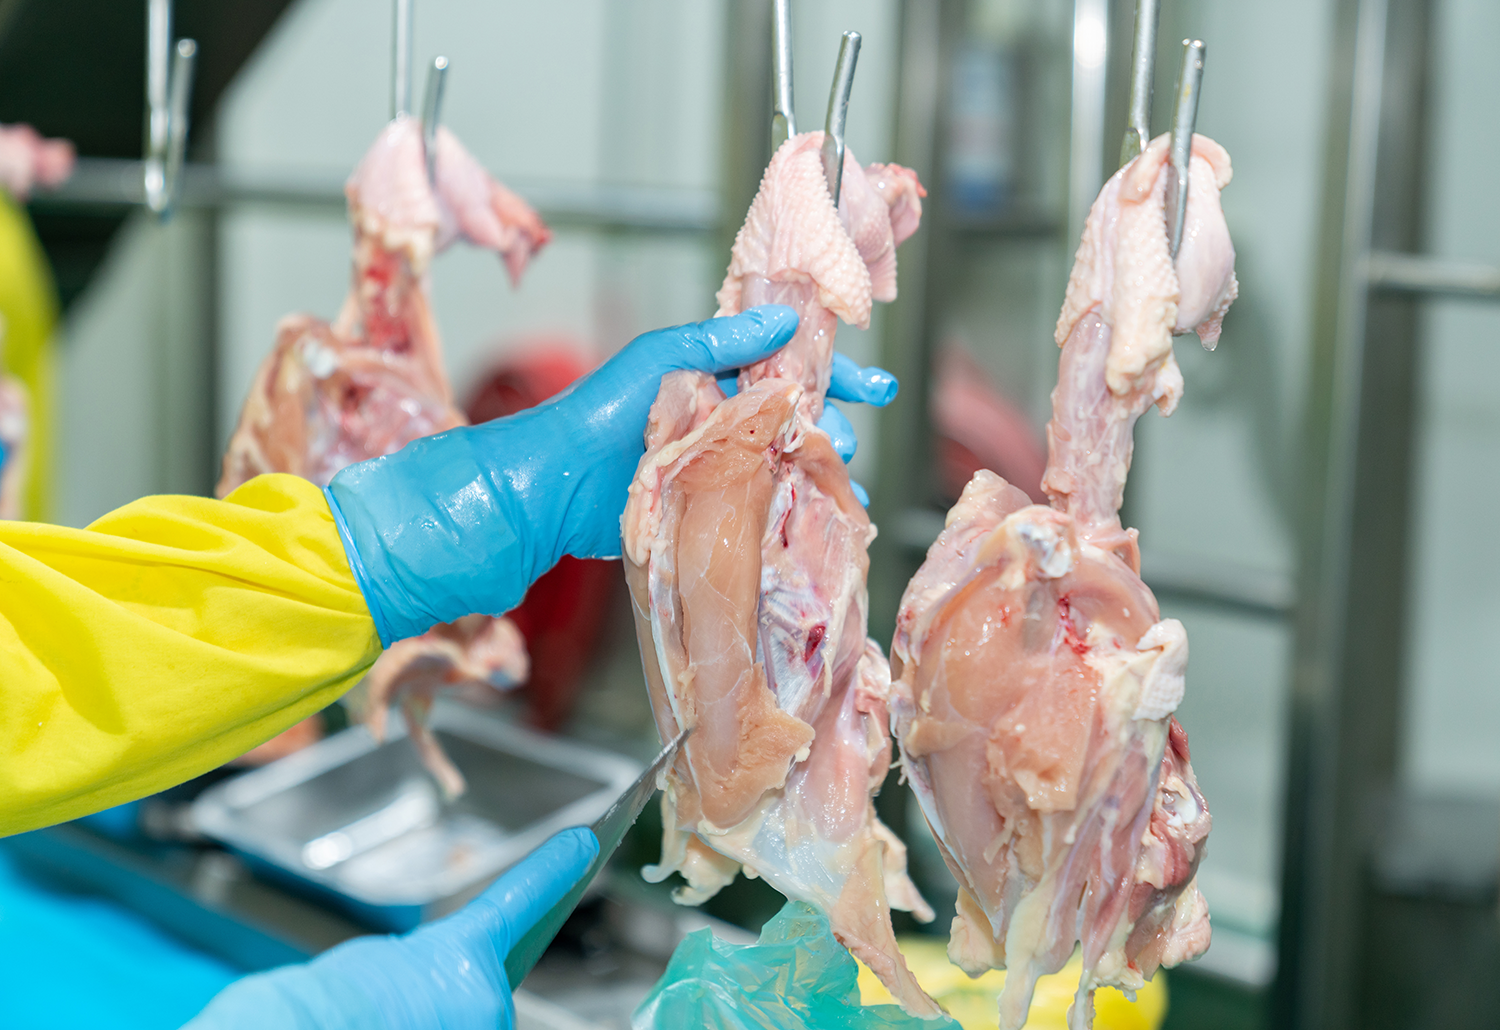 A production line worker using a sharpened poultry processing knife to trim the chicken.